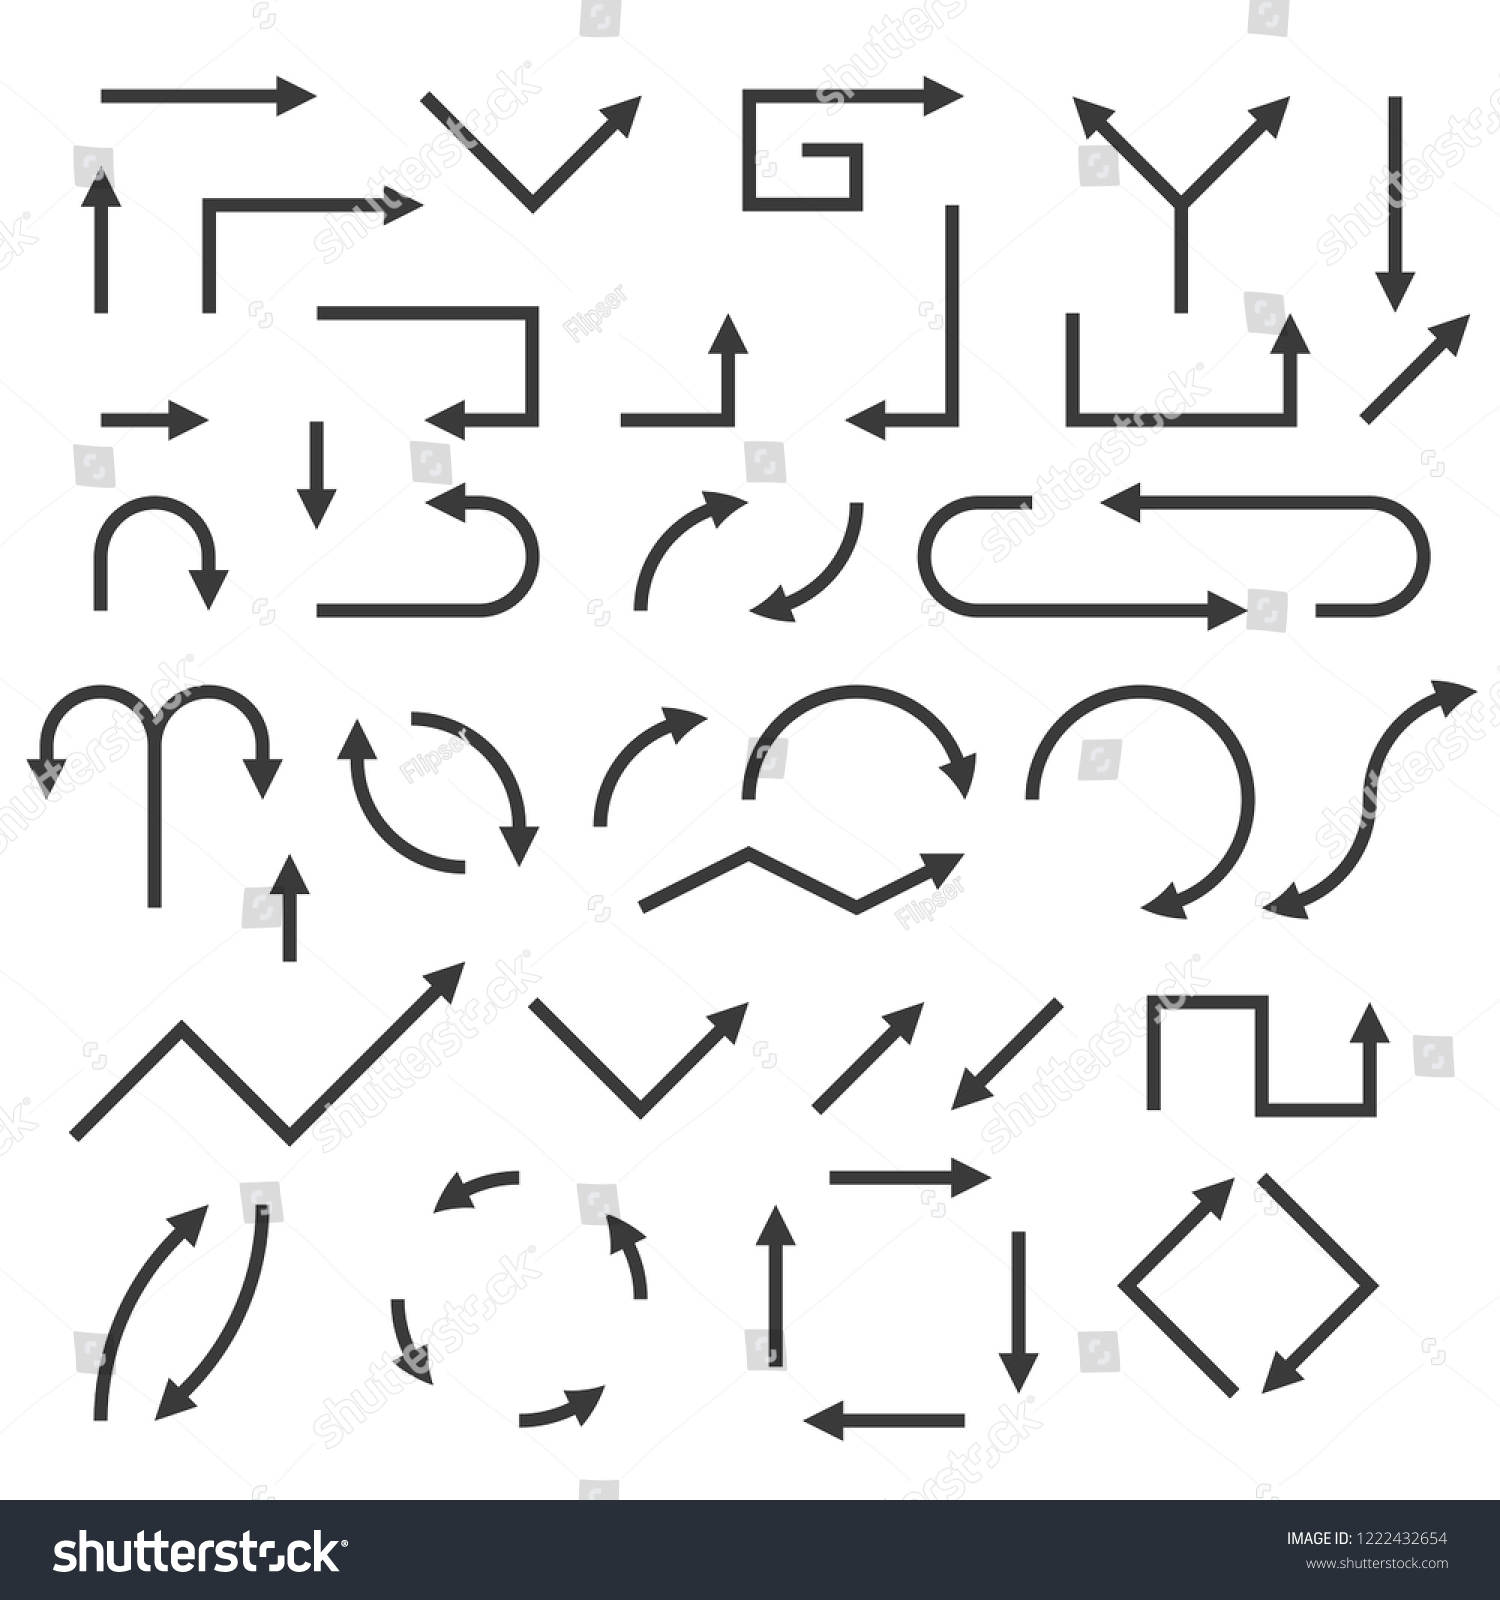 Black arrows. Vector illustration isolated on white background #1222432654